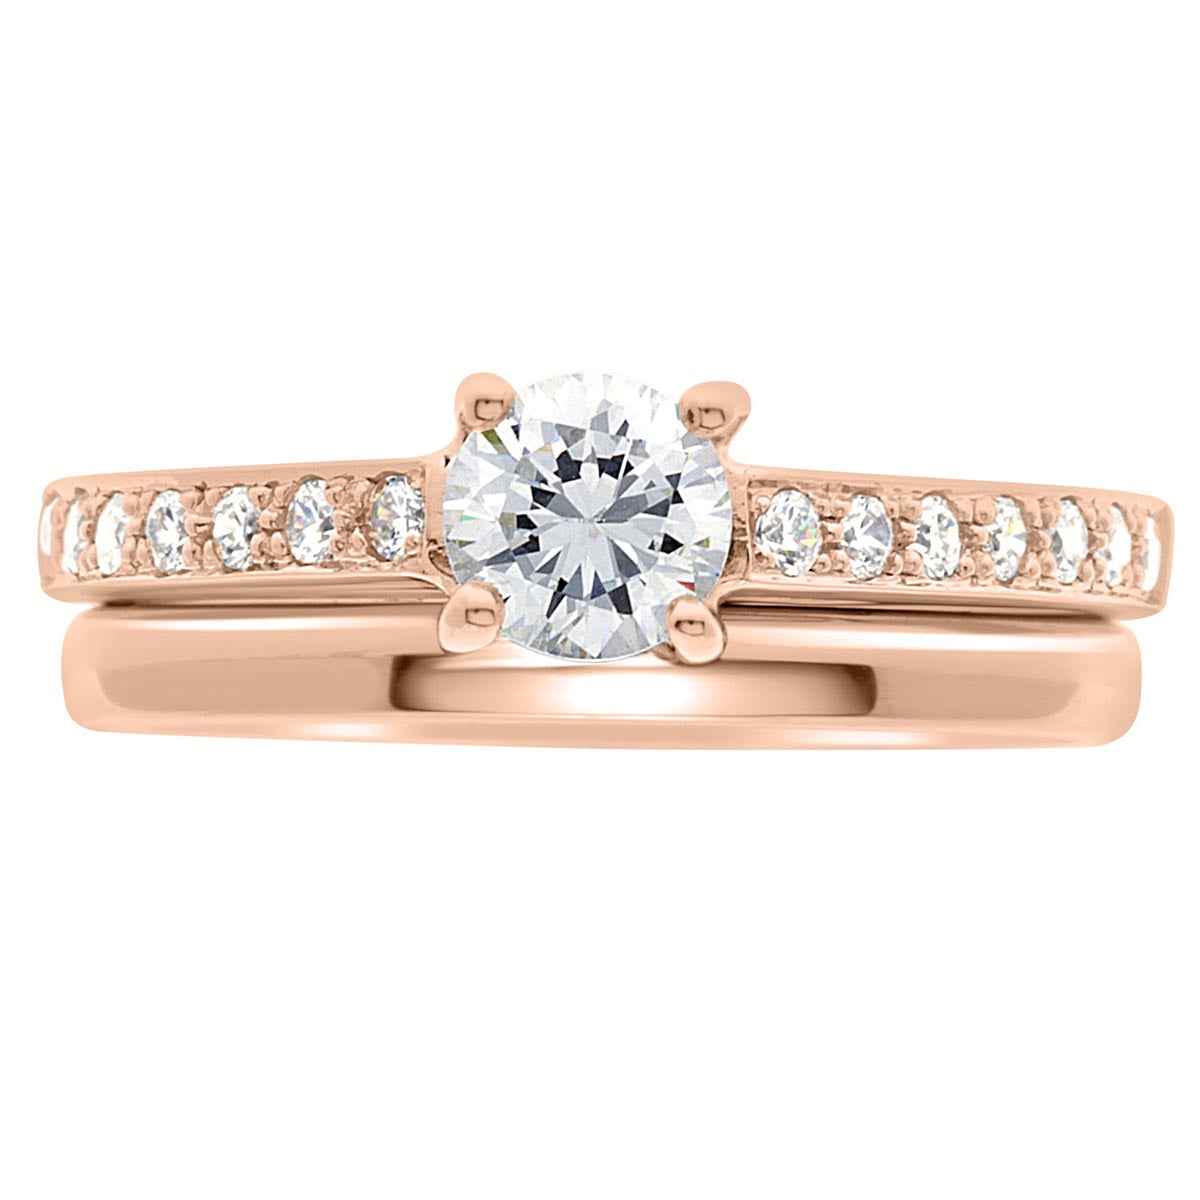 Princess Cut Bezel Ring set in rose gold pictured with a plain wedding ring